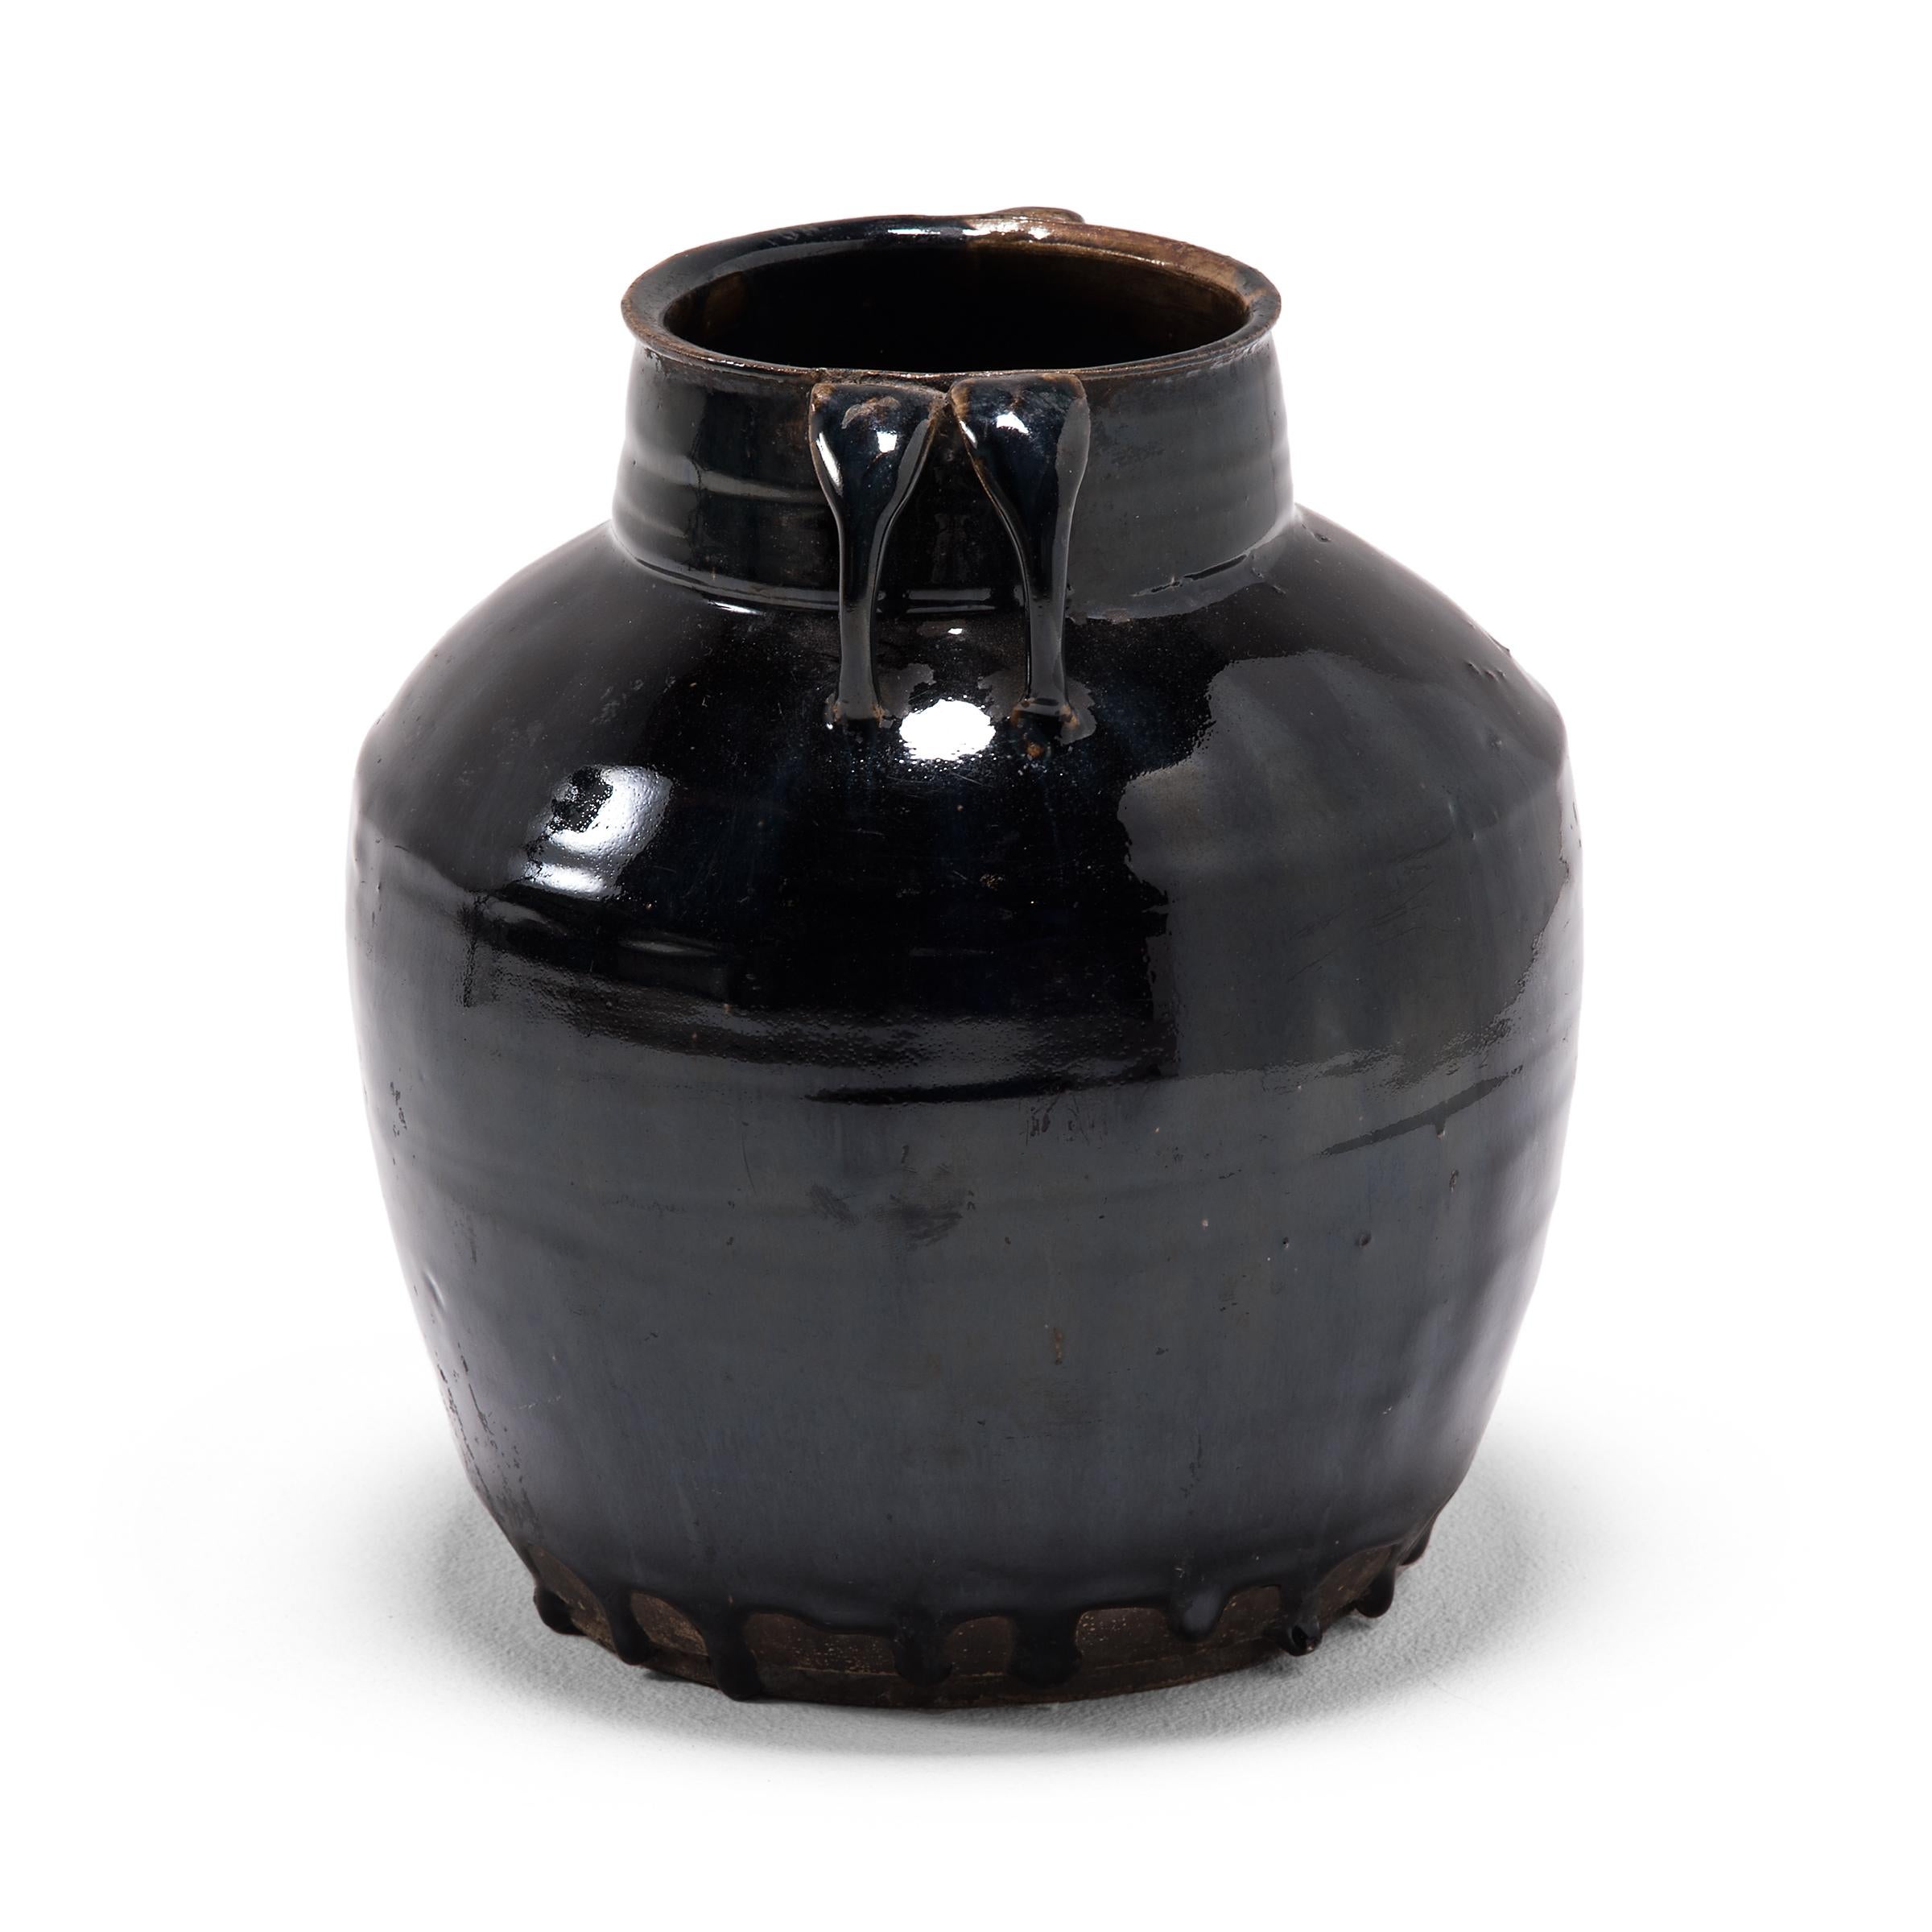 As though slicked with oil, an inky black glaze drenches the high shoulders and arched double strap handles of this tapered kitchen vessel. The 19th century ceramic jar was once used to prepare and store soy sauce in a Qing-dynasty kitchen, as